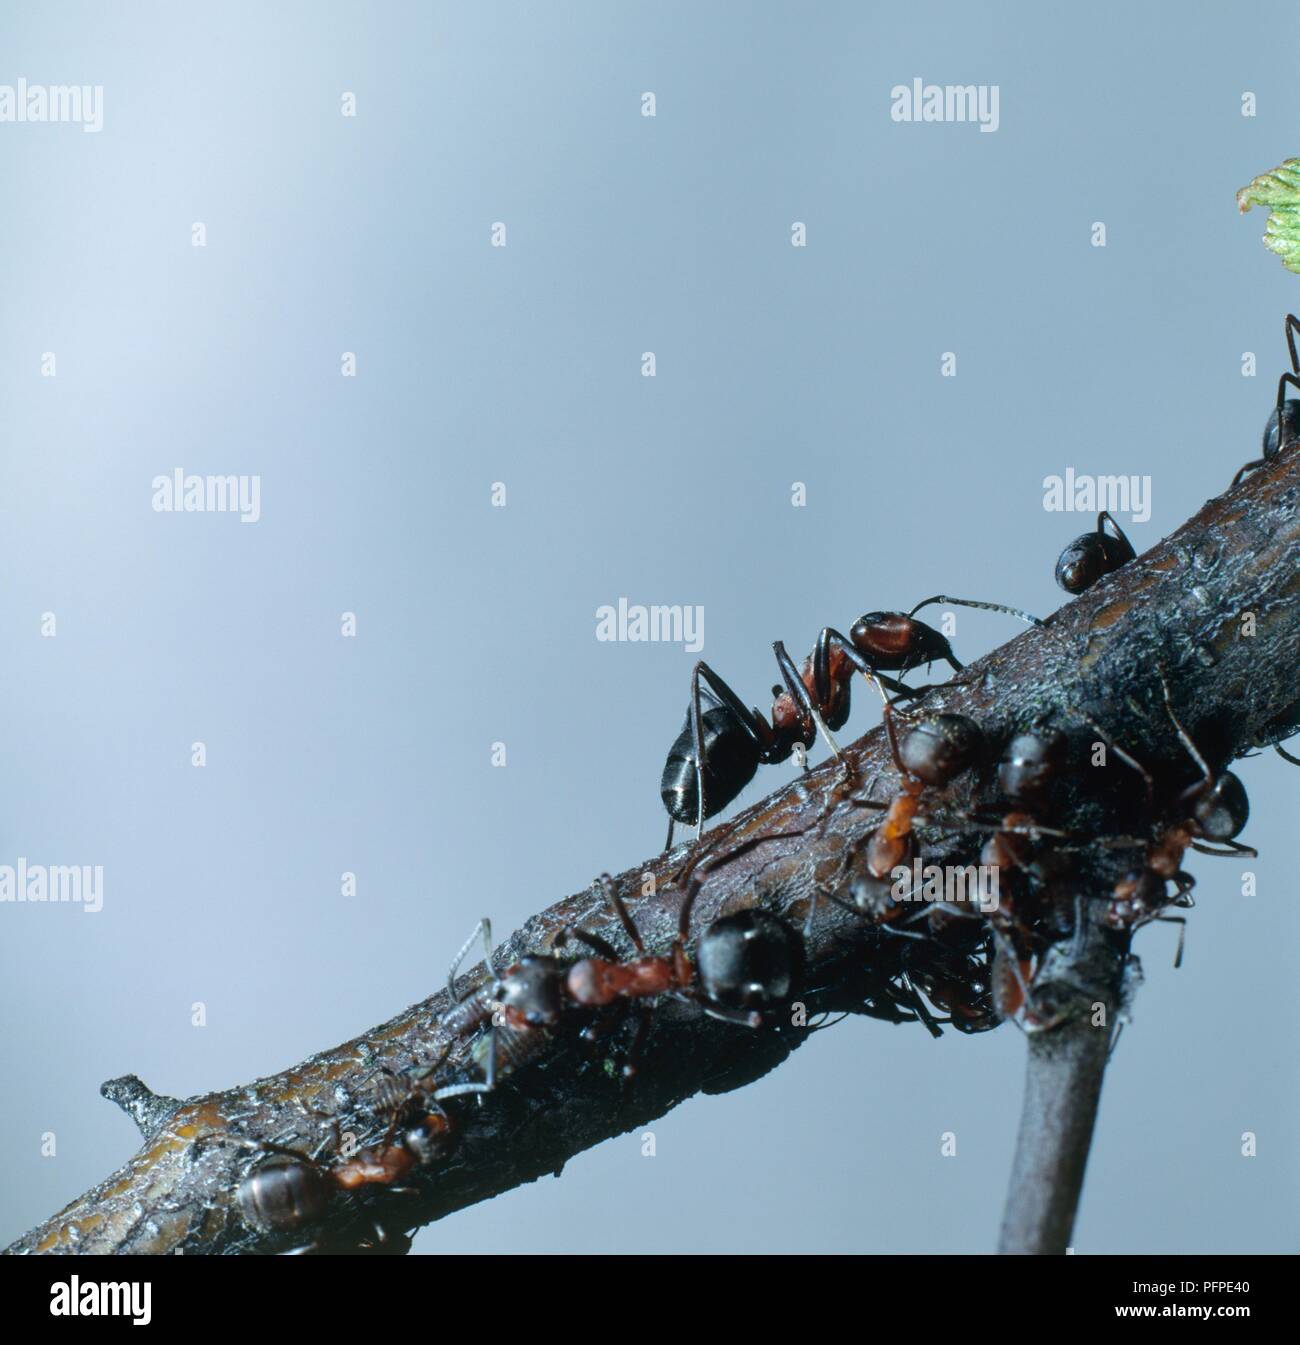 Colony of Wood ants (Formica rufa) on tree branch Stock Photo